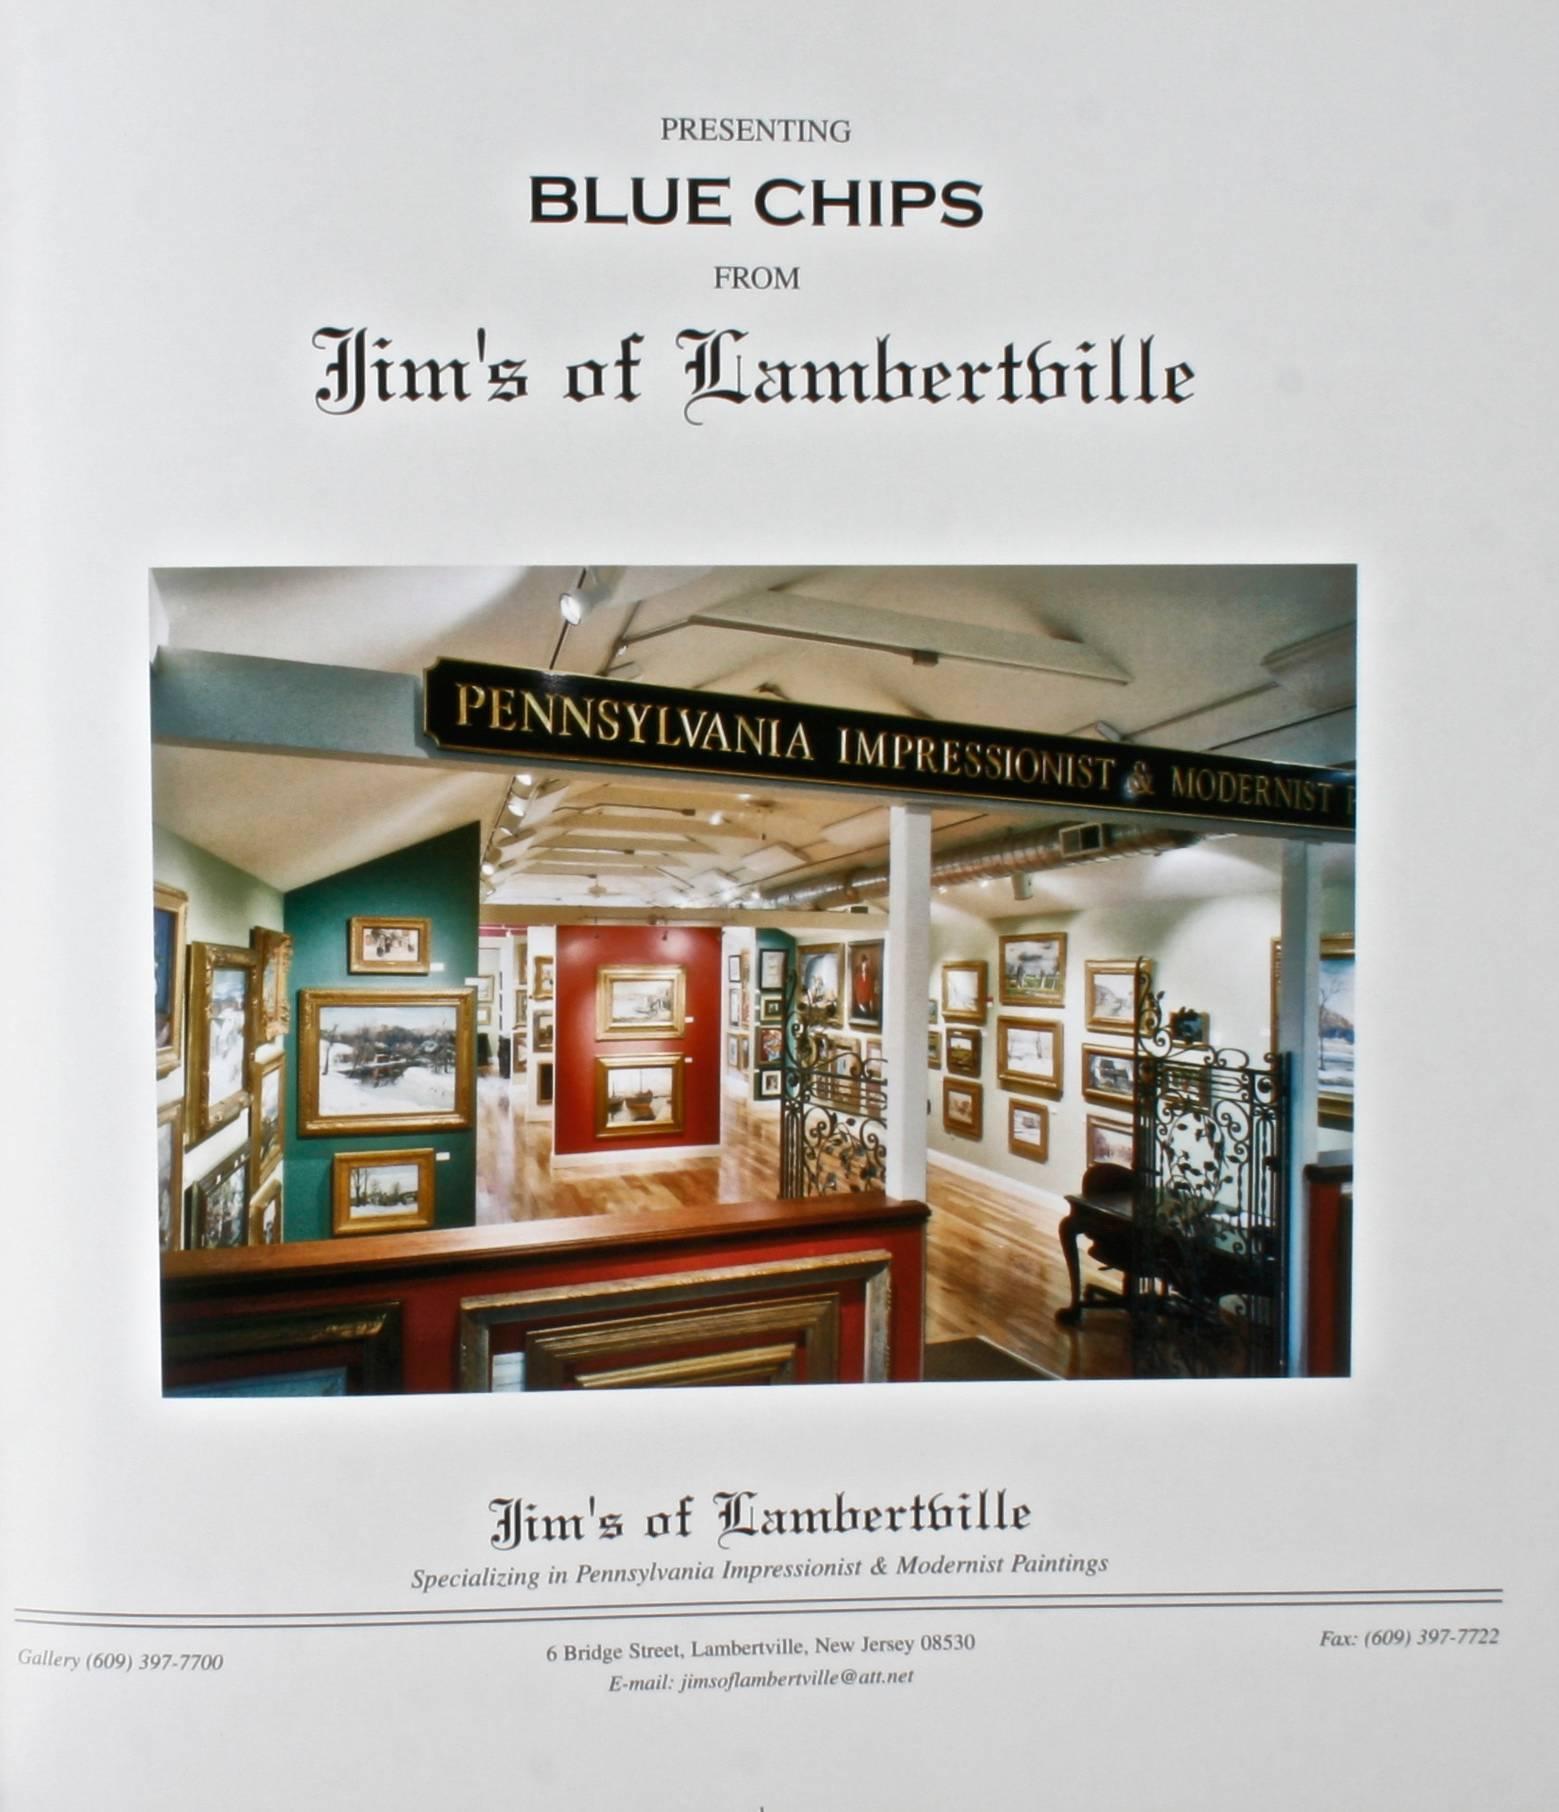 Blue Chips from Jim's of Lambertville. 128 pp. A gallery catalogue from Jim's of Lambertville, an art dealer specializing in Pennsylvania impressionist and modernist paintings. Artists include Daniel Garber, Lee Gatch, Martha Walter, Lloyd Ney and